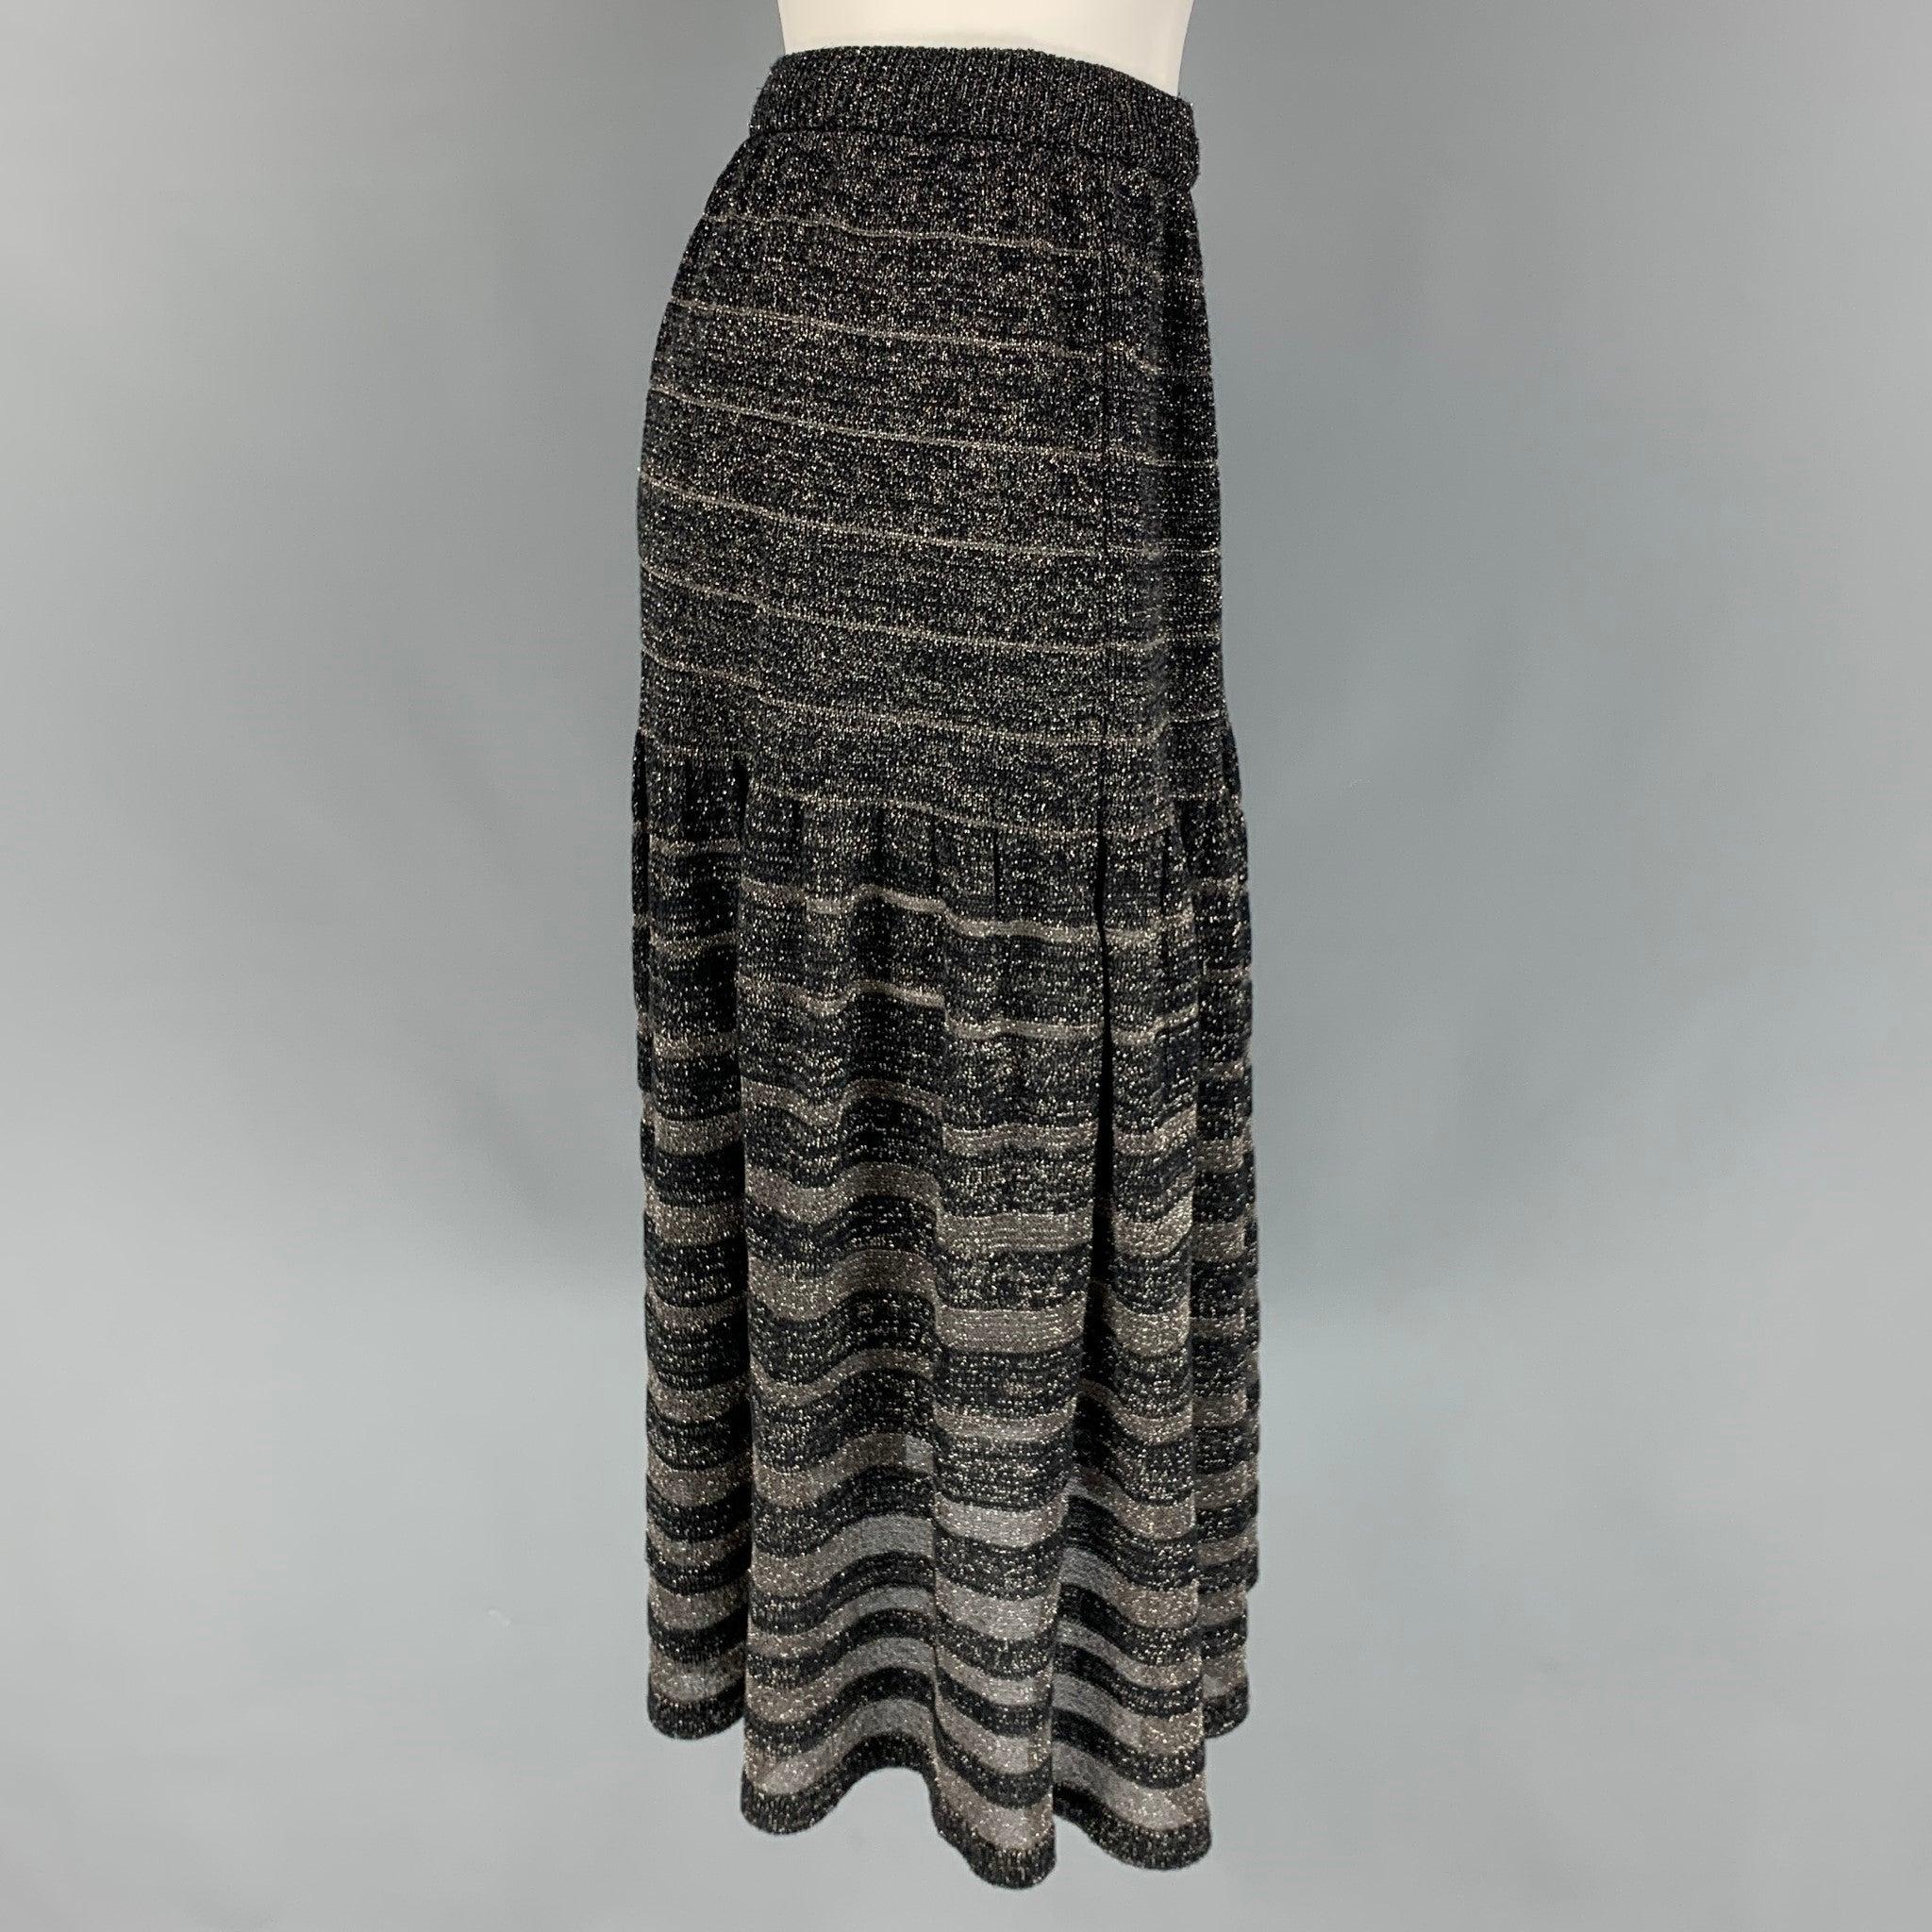 KENZO skirt comes in a black & silver knitted acrylic blend featuring a mid-calf length, a-line, and a elastic waistband.
Very Good
Pre-Owned Condition. 

Marked:   S 

Measurements: 
  Waist: 25 inches  Hip:
34 inches  Length: 28 inches 
  
  
